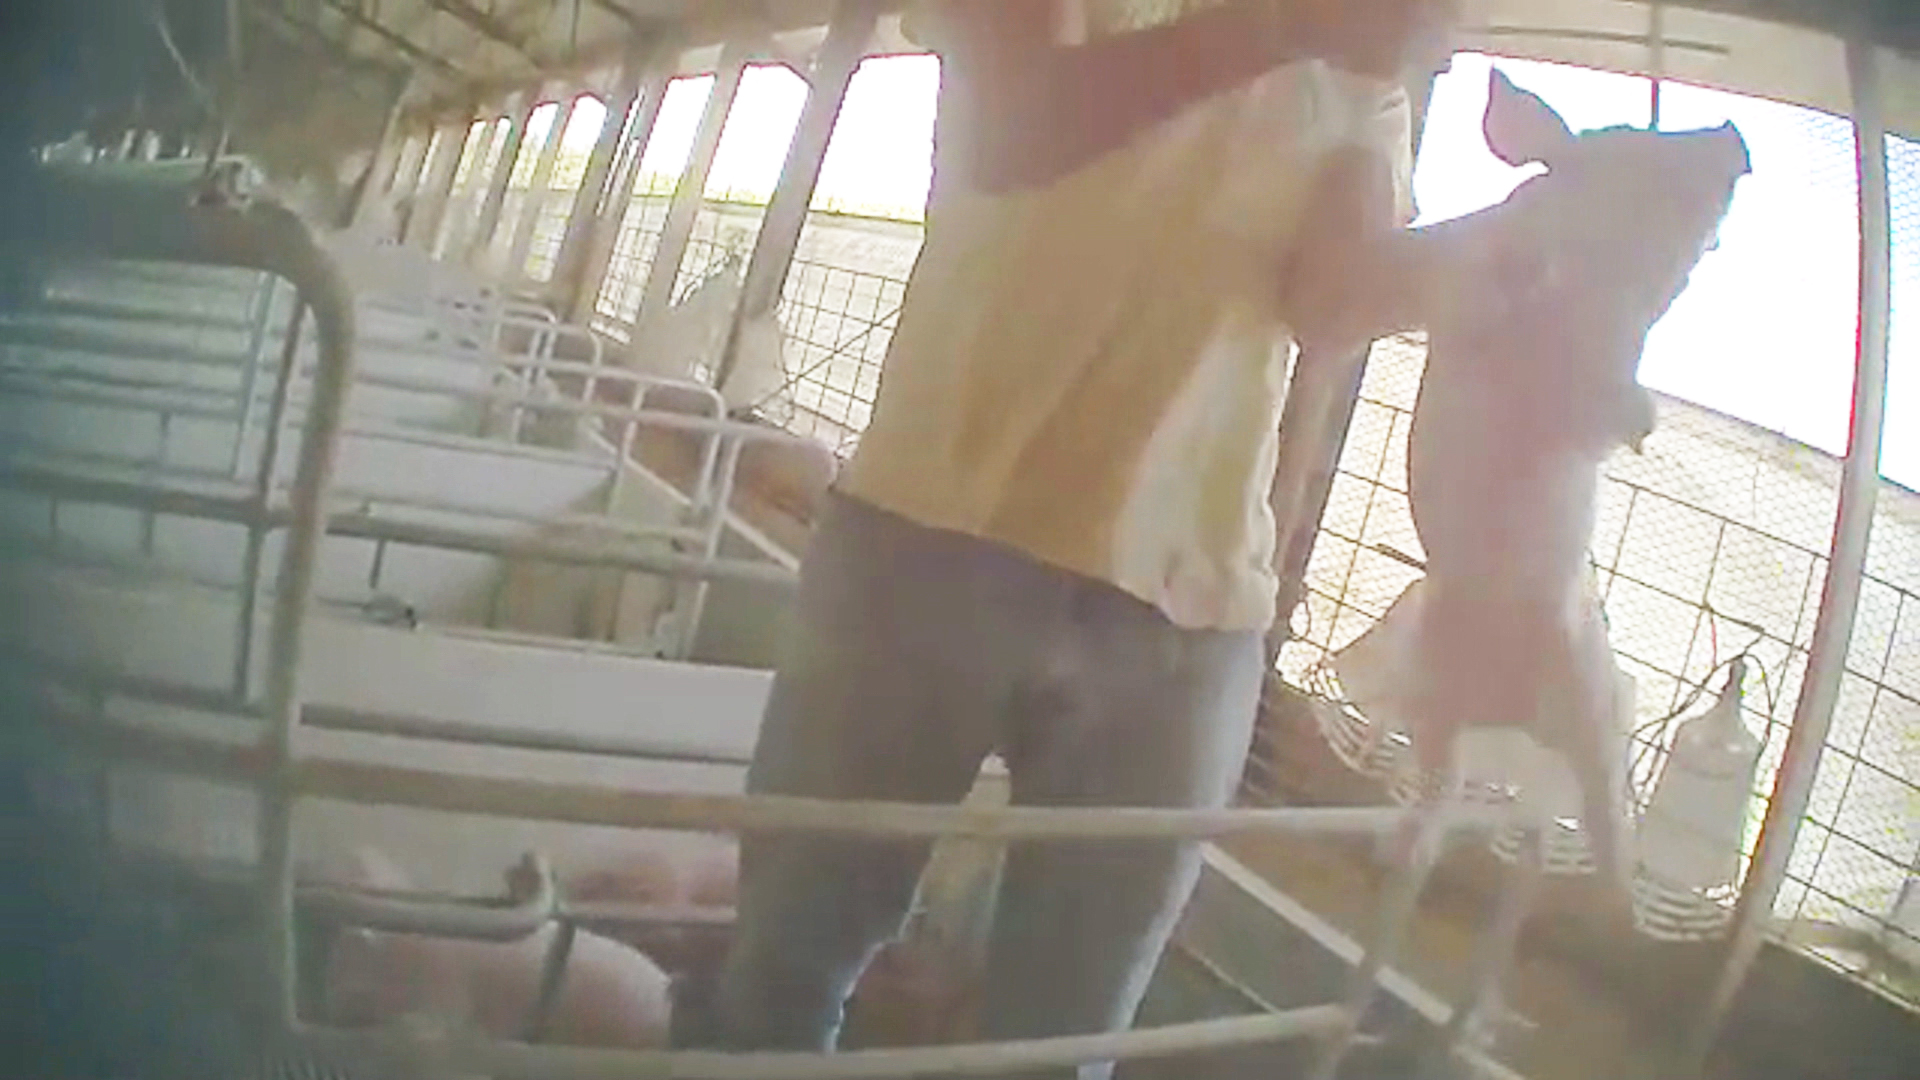 Undercover video shows alleged animal cruelty at pig farm